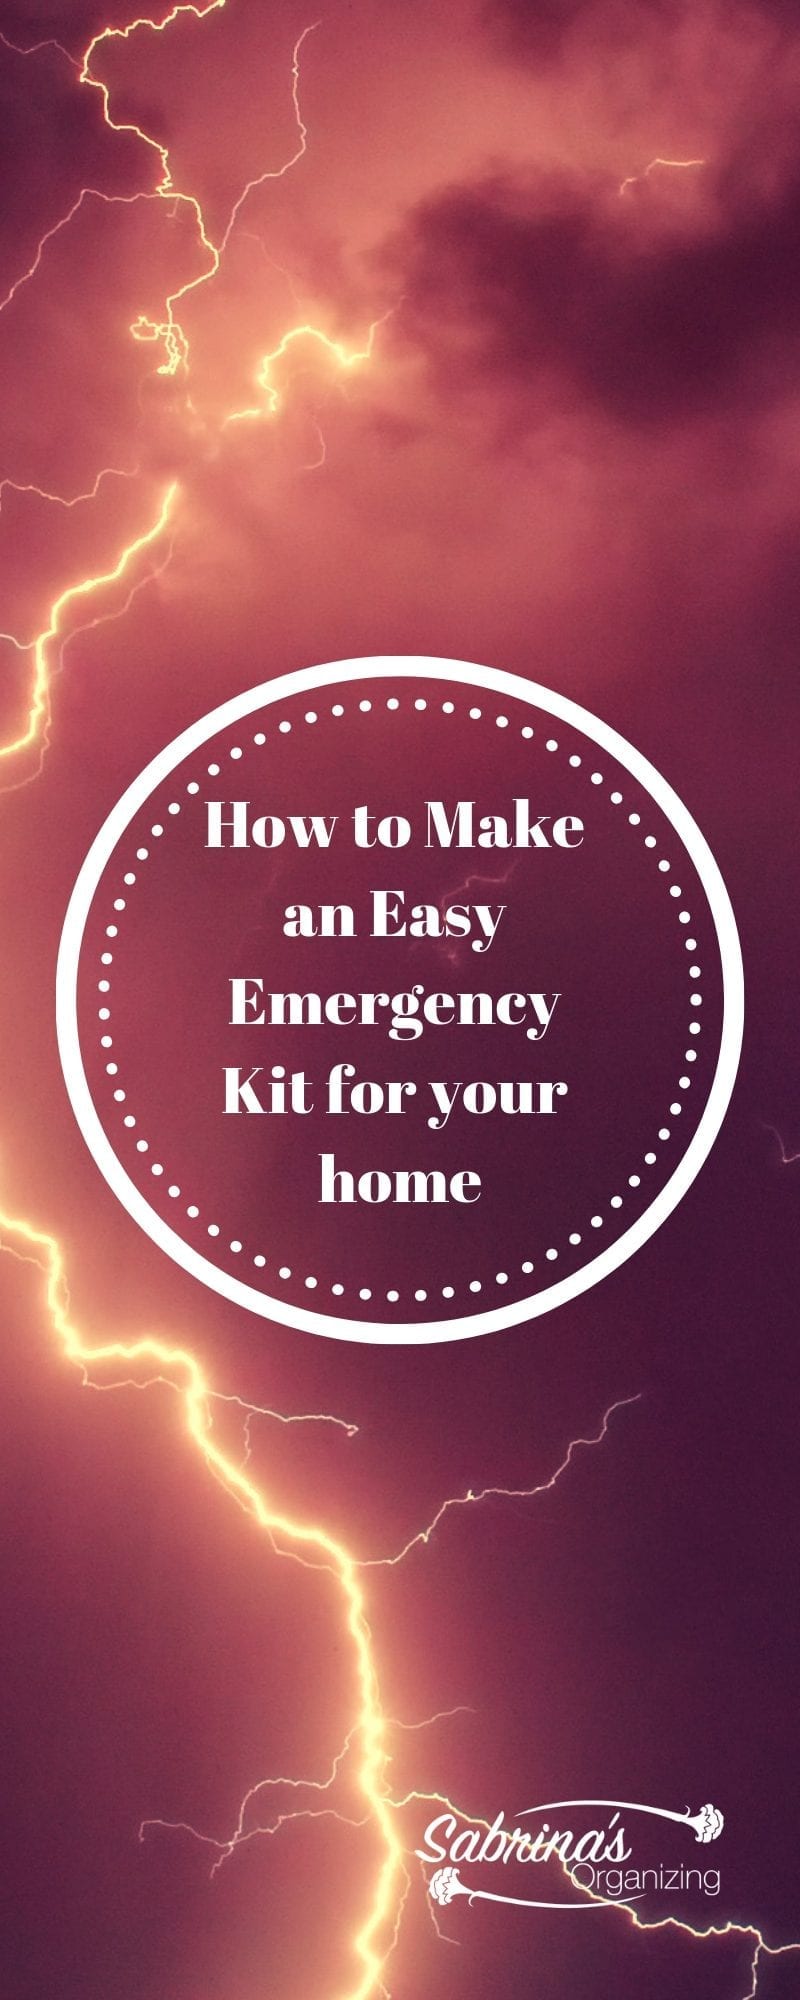 How to Make an Easy Emergency Kit for your home